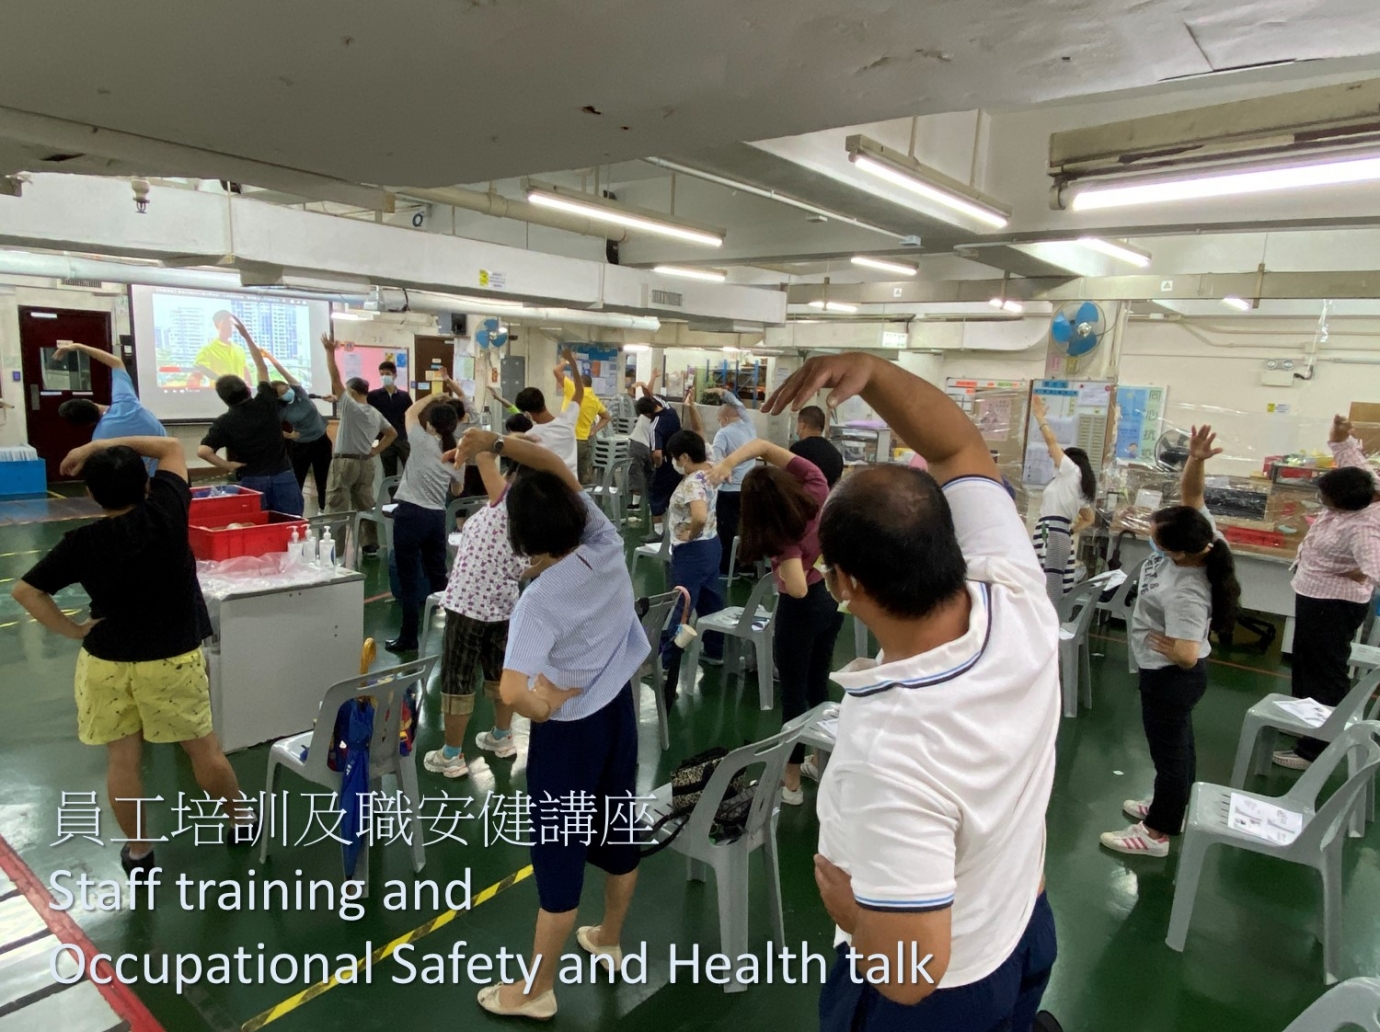 Staff Training and Occupational Safety and Health talk